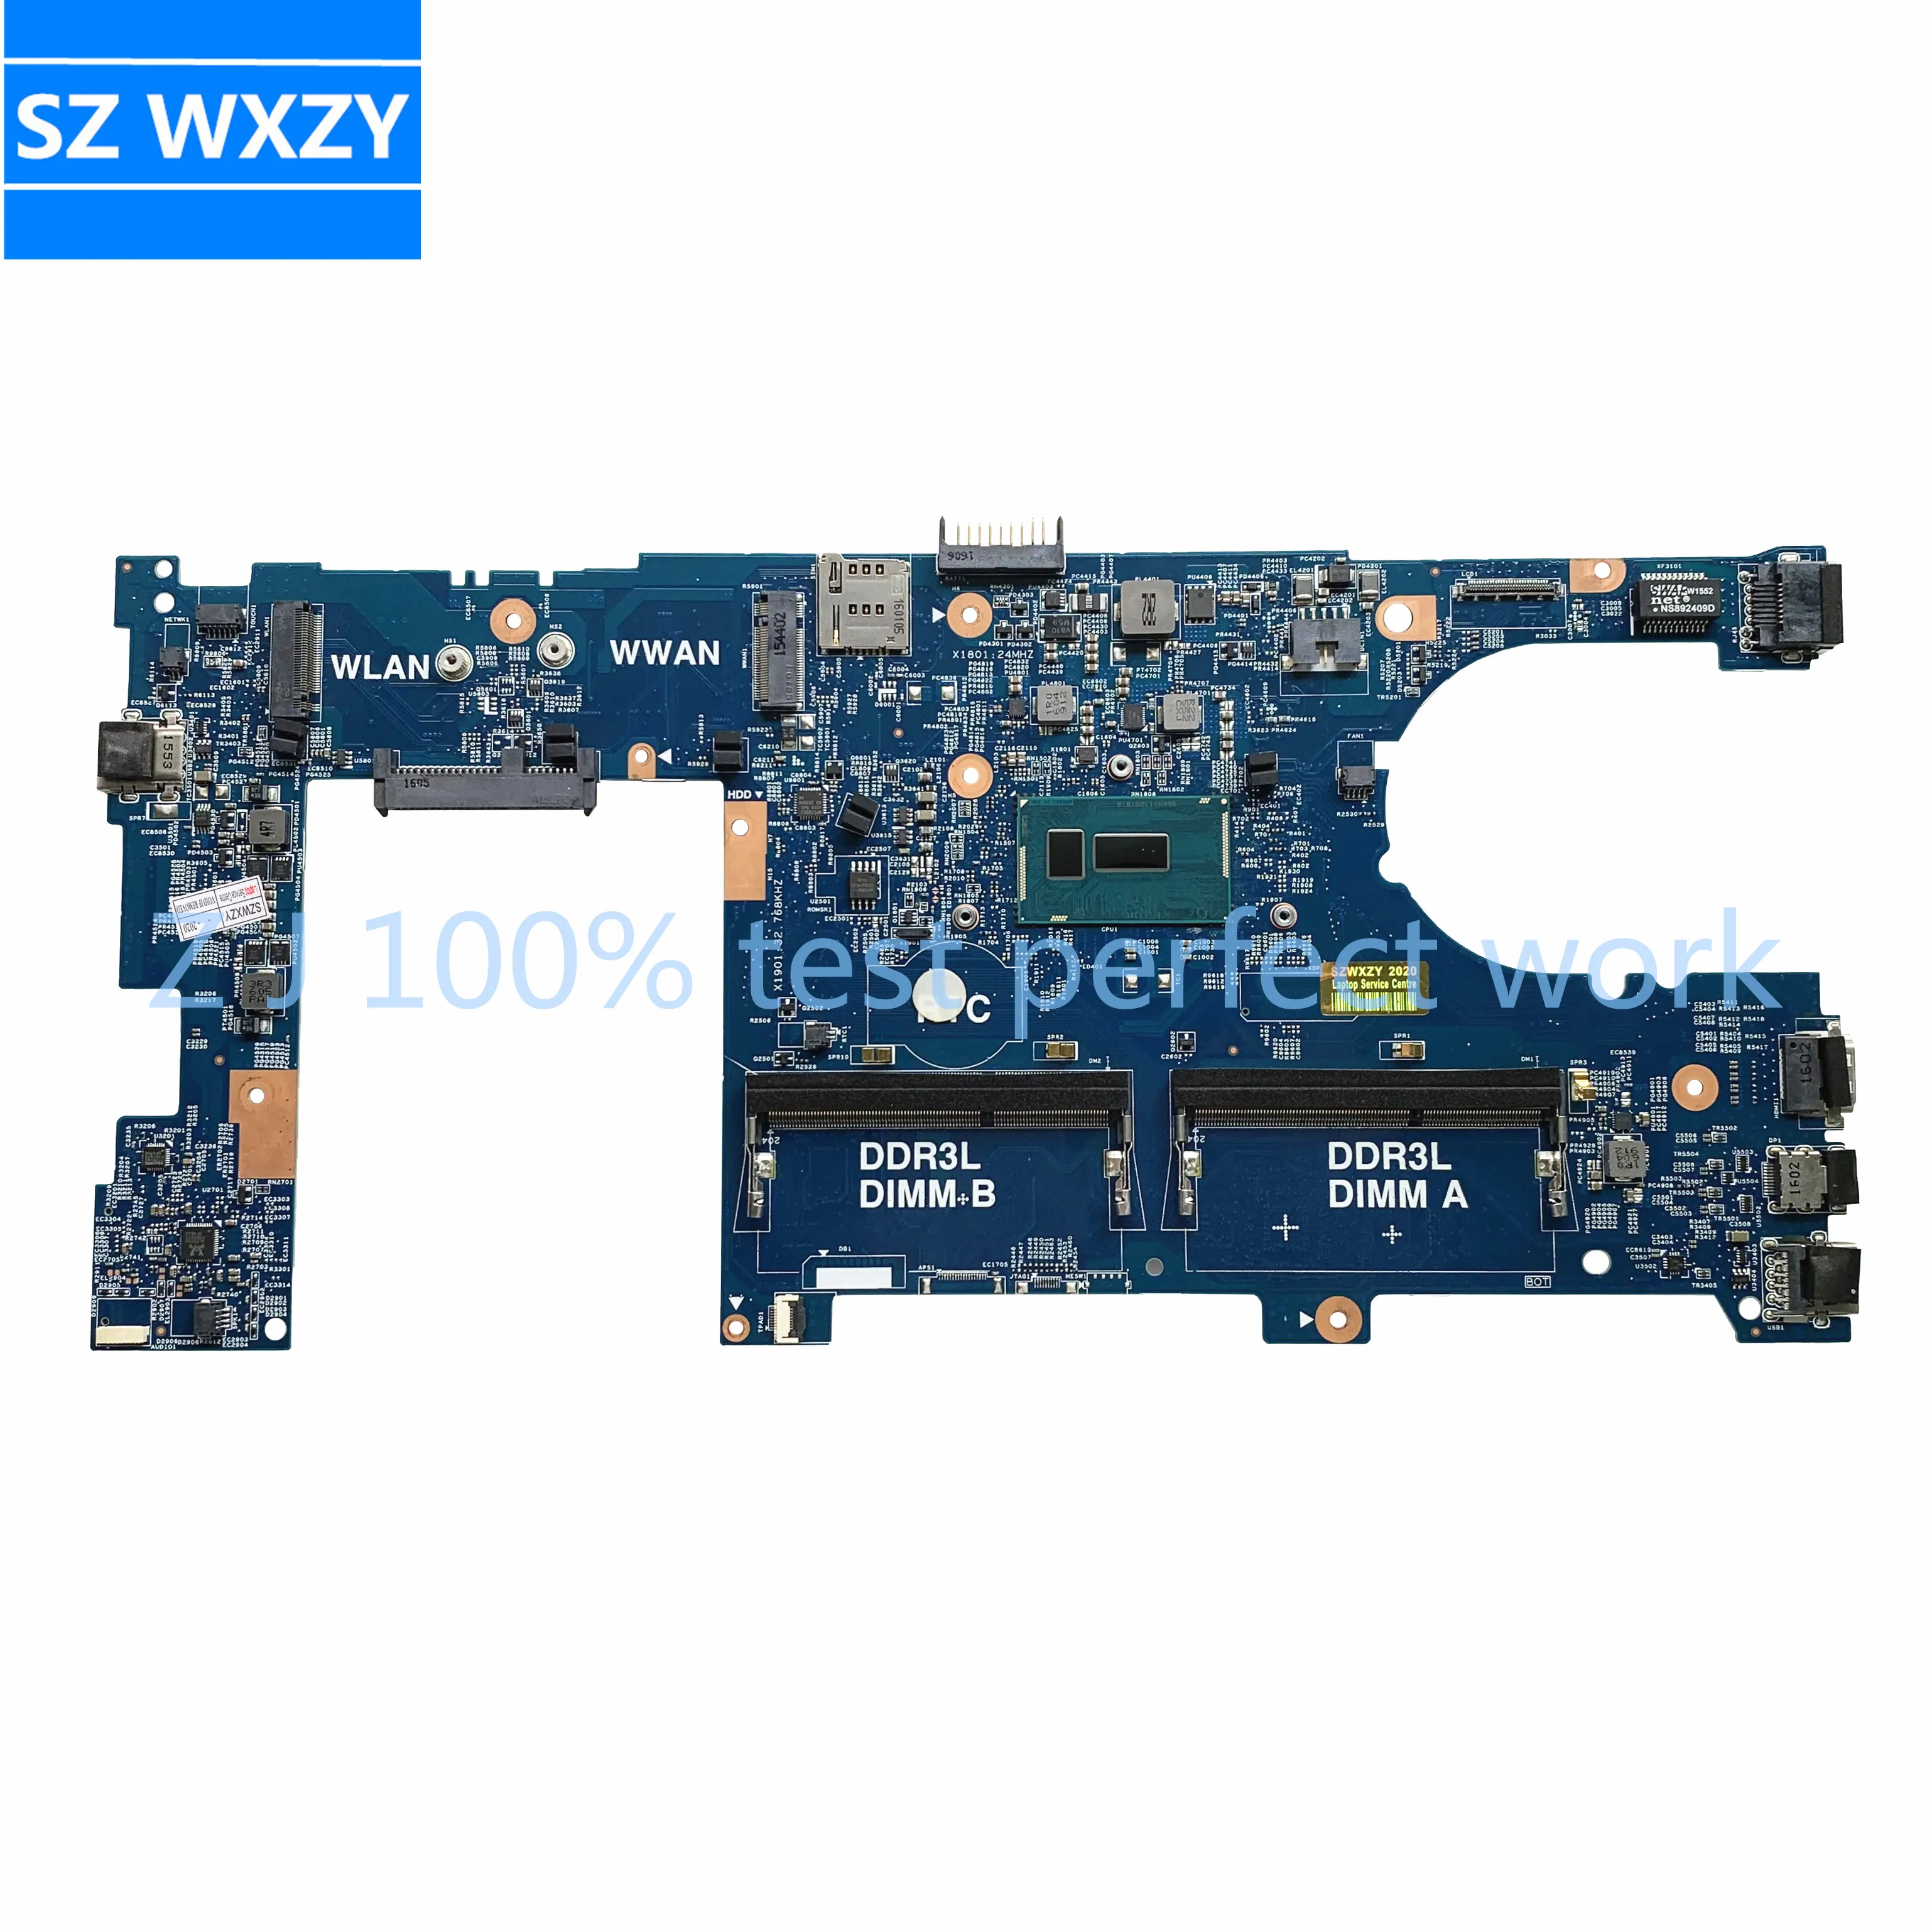 

High Quality For DELL Latitude 3350 Laptop Motherboard CN-0JV3DW 0JV3DW 15203-1 PWB:JM7HC SR23Y I5-5200U DDR3L MB 100% Tested